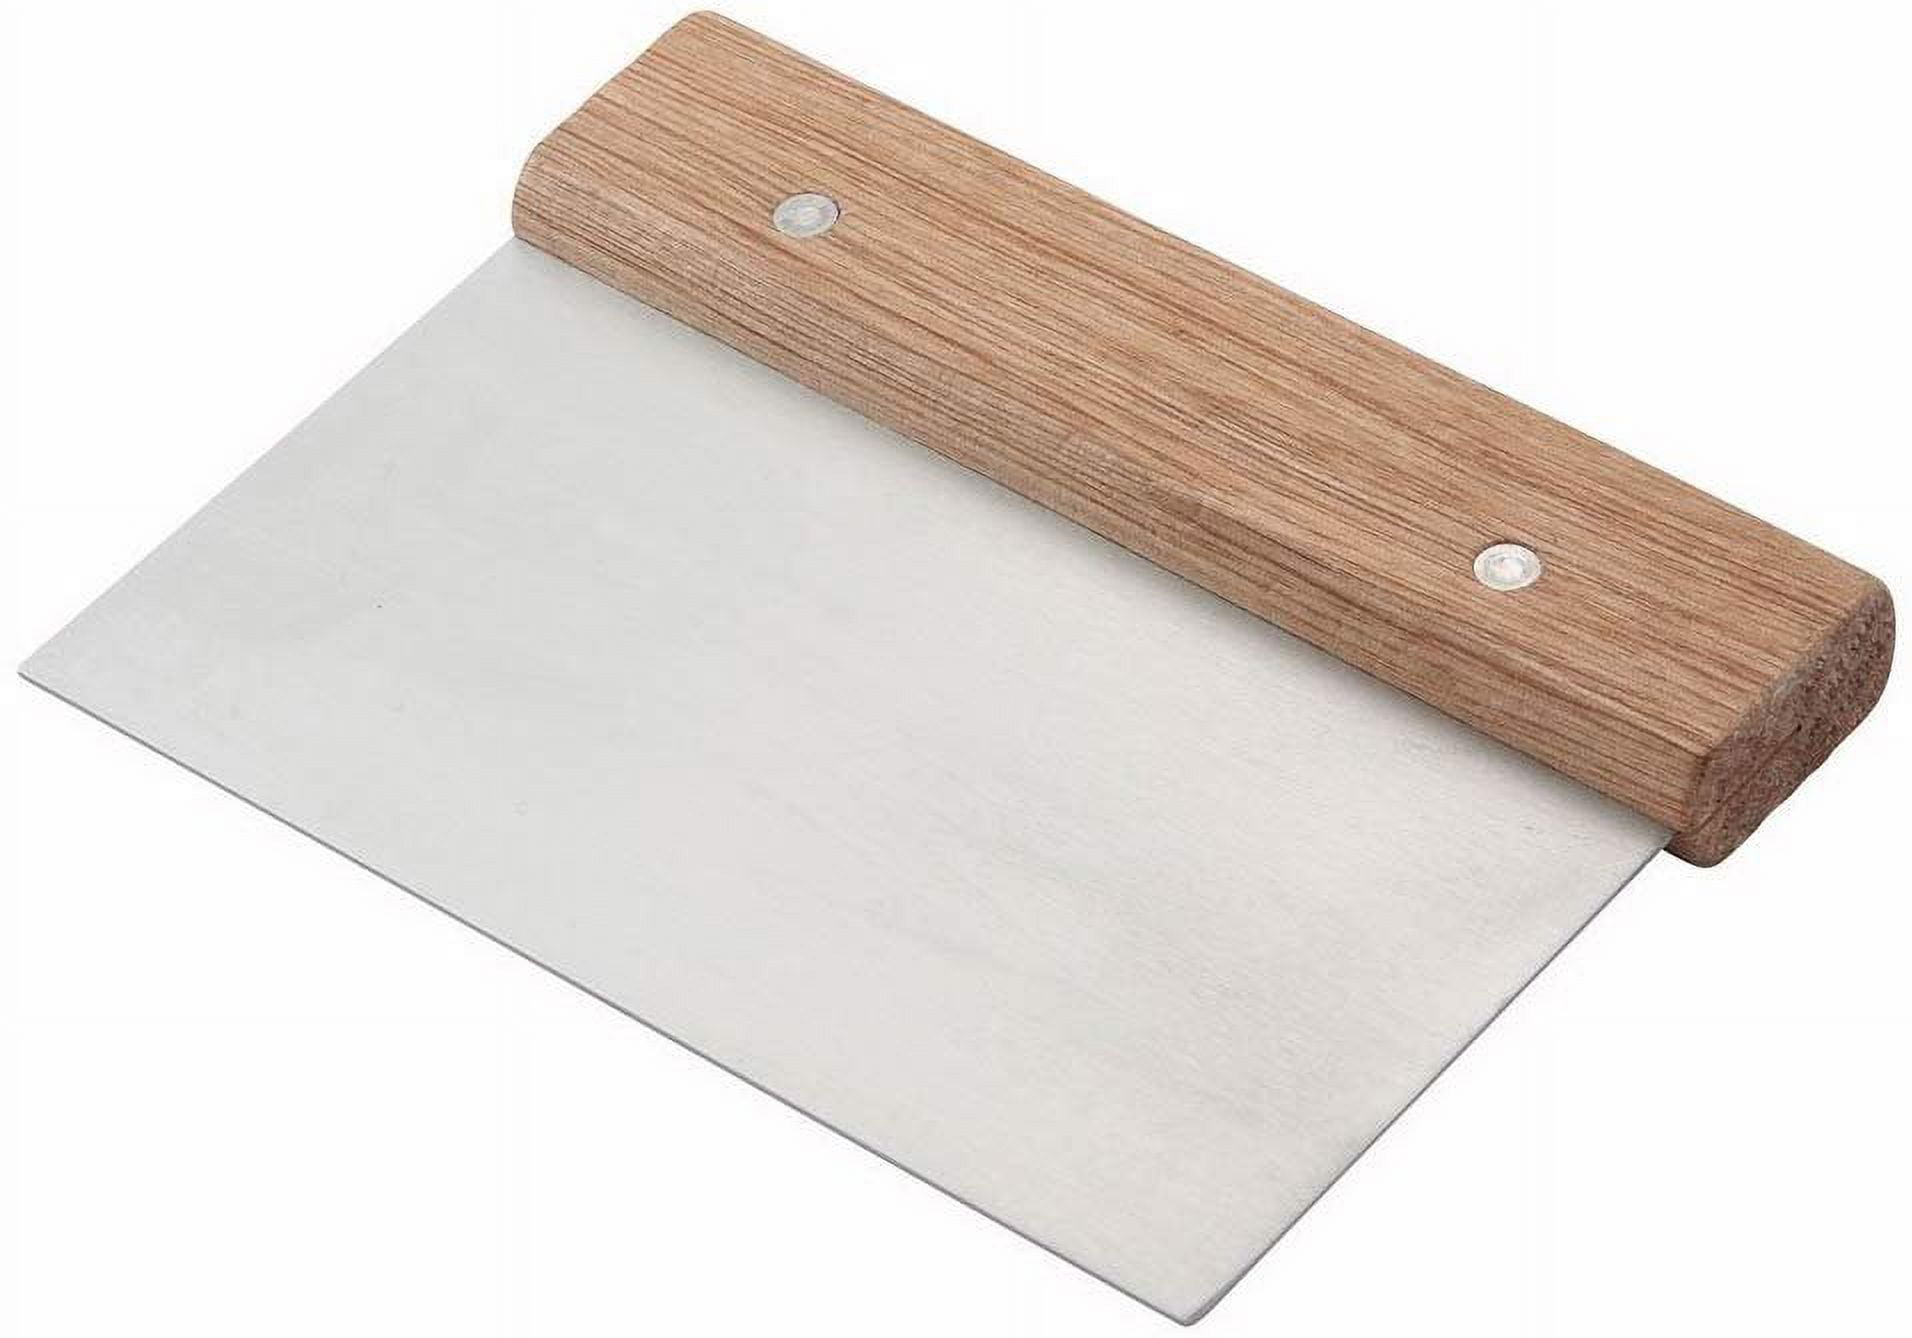 Nordic Ware Nordicware Scraper 02105 Dough Cutter, with Beechwood Grip,  Stainless Steel Blade, Silver